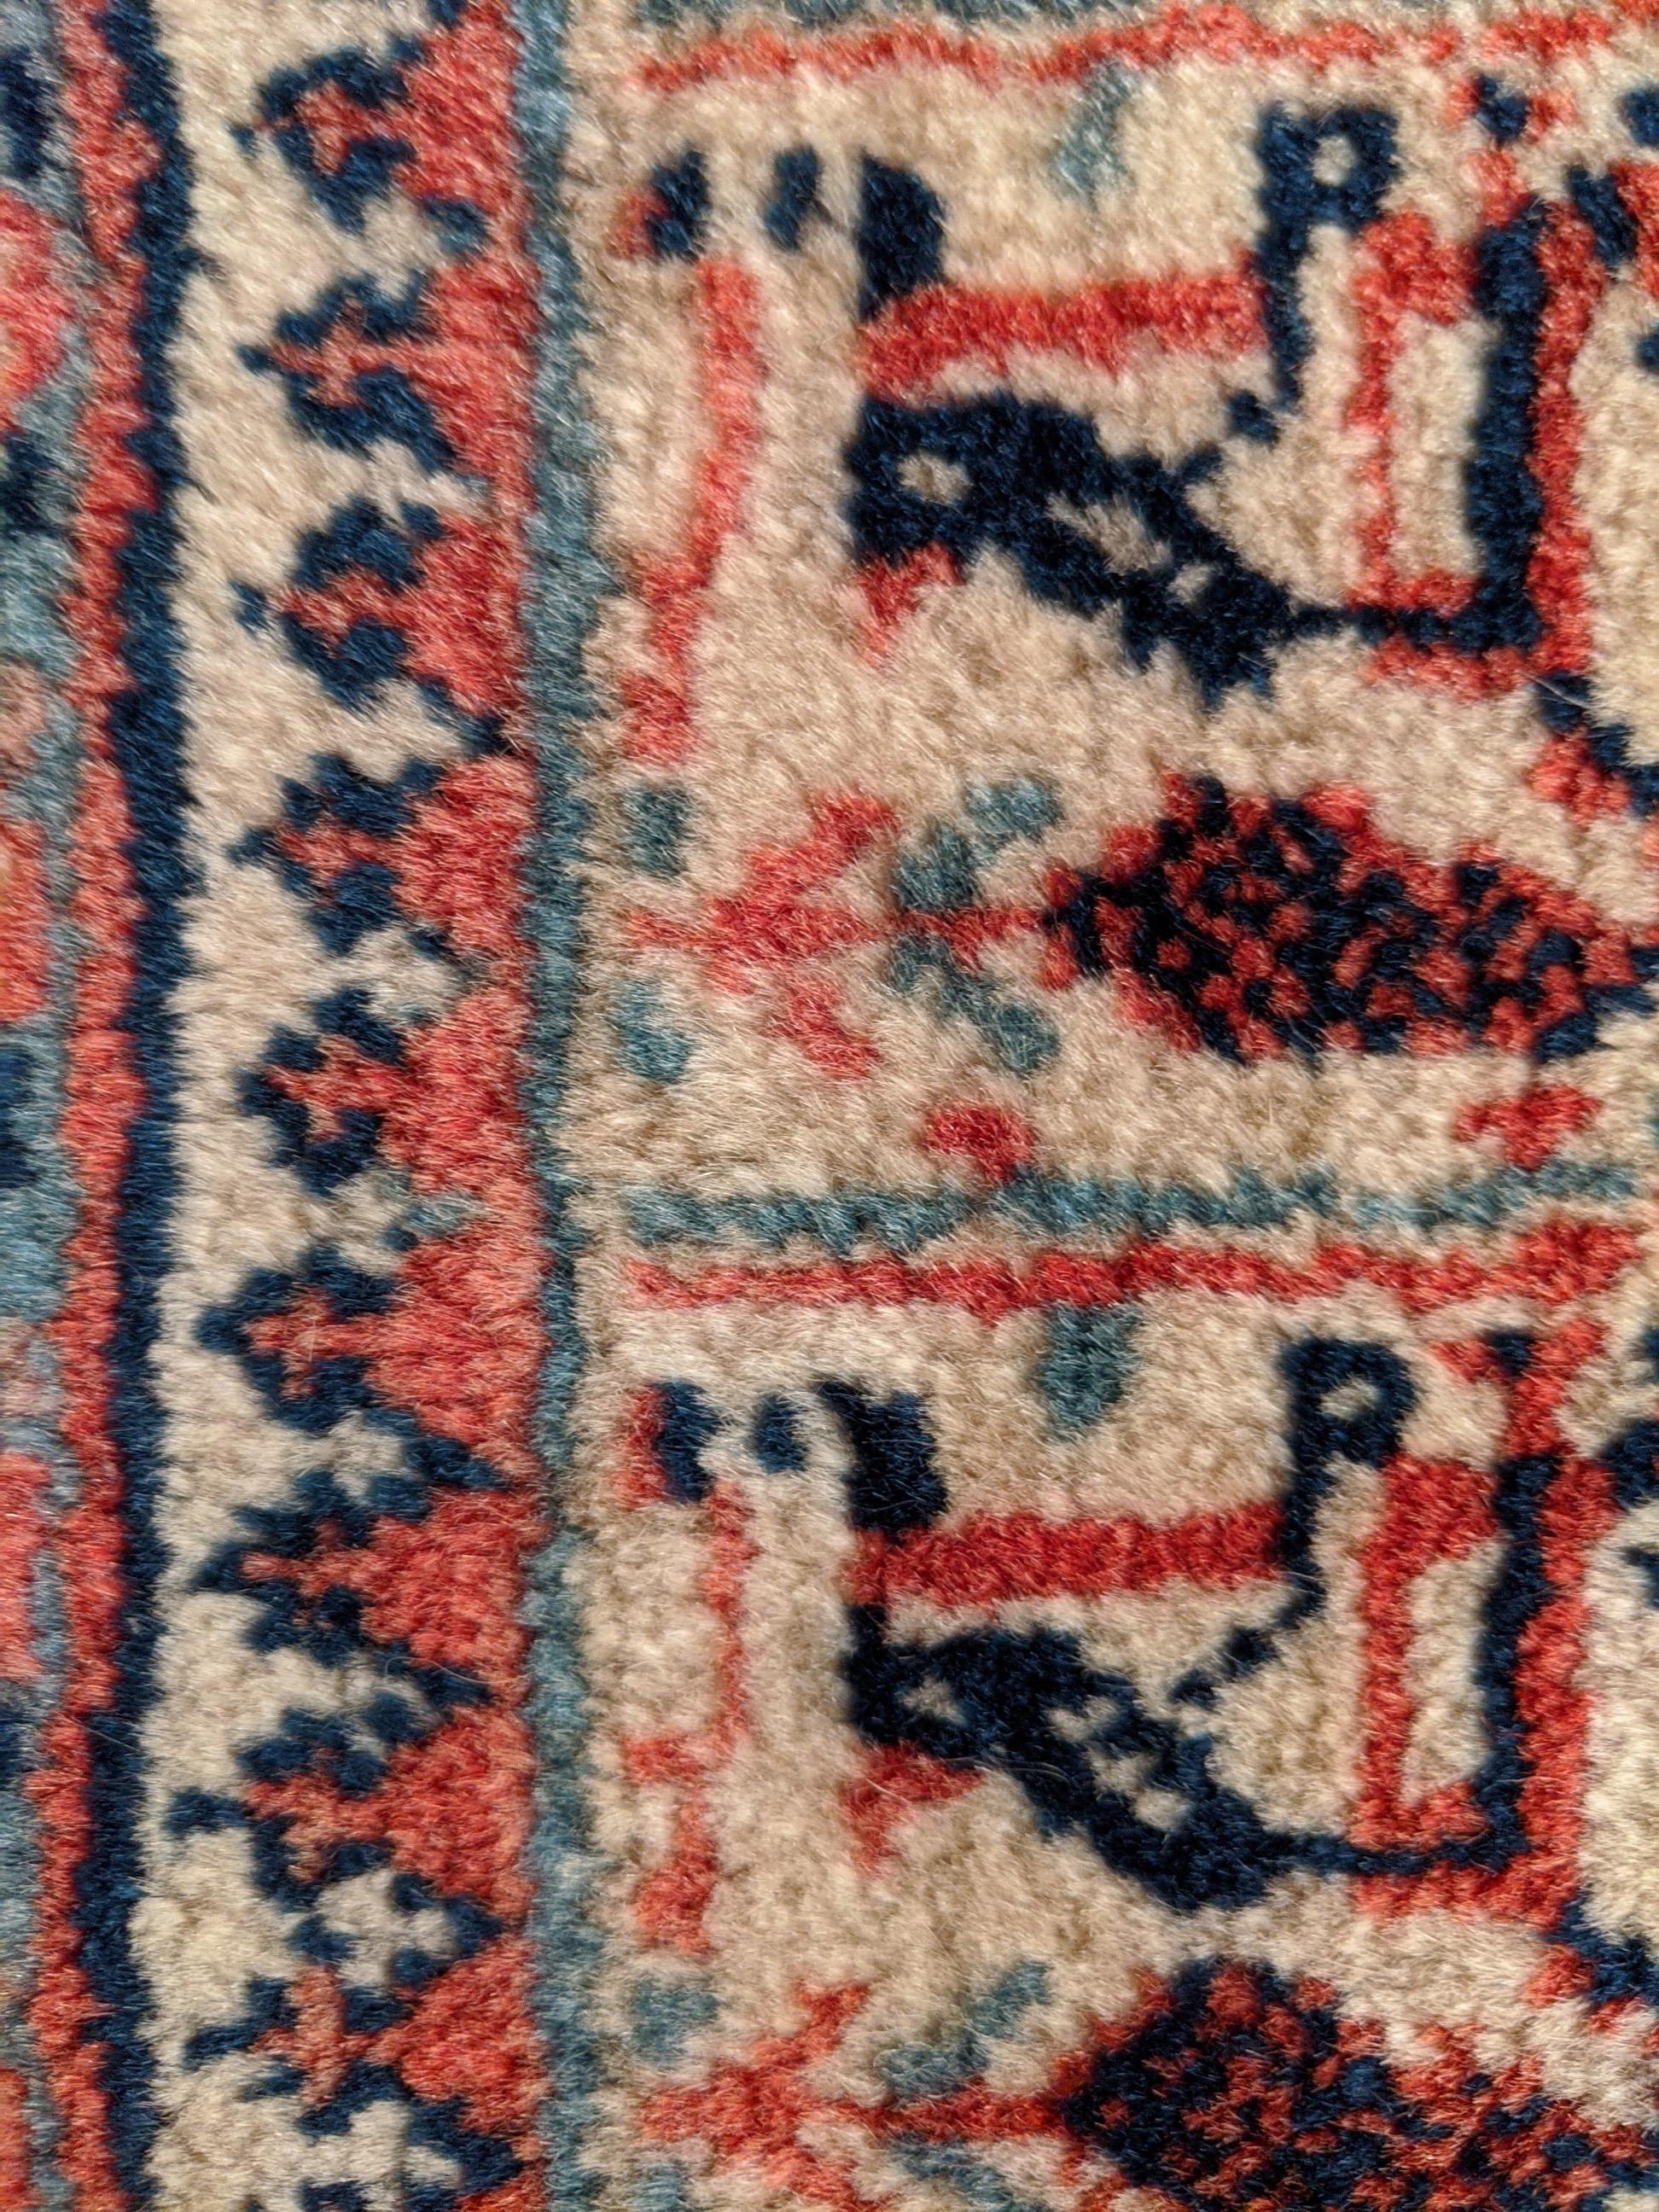 Hand-Woven Authentic Handknotted Persian Mir 1940s Rug 9'x12' For Sale